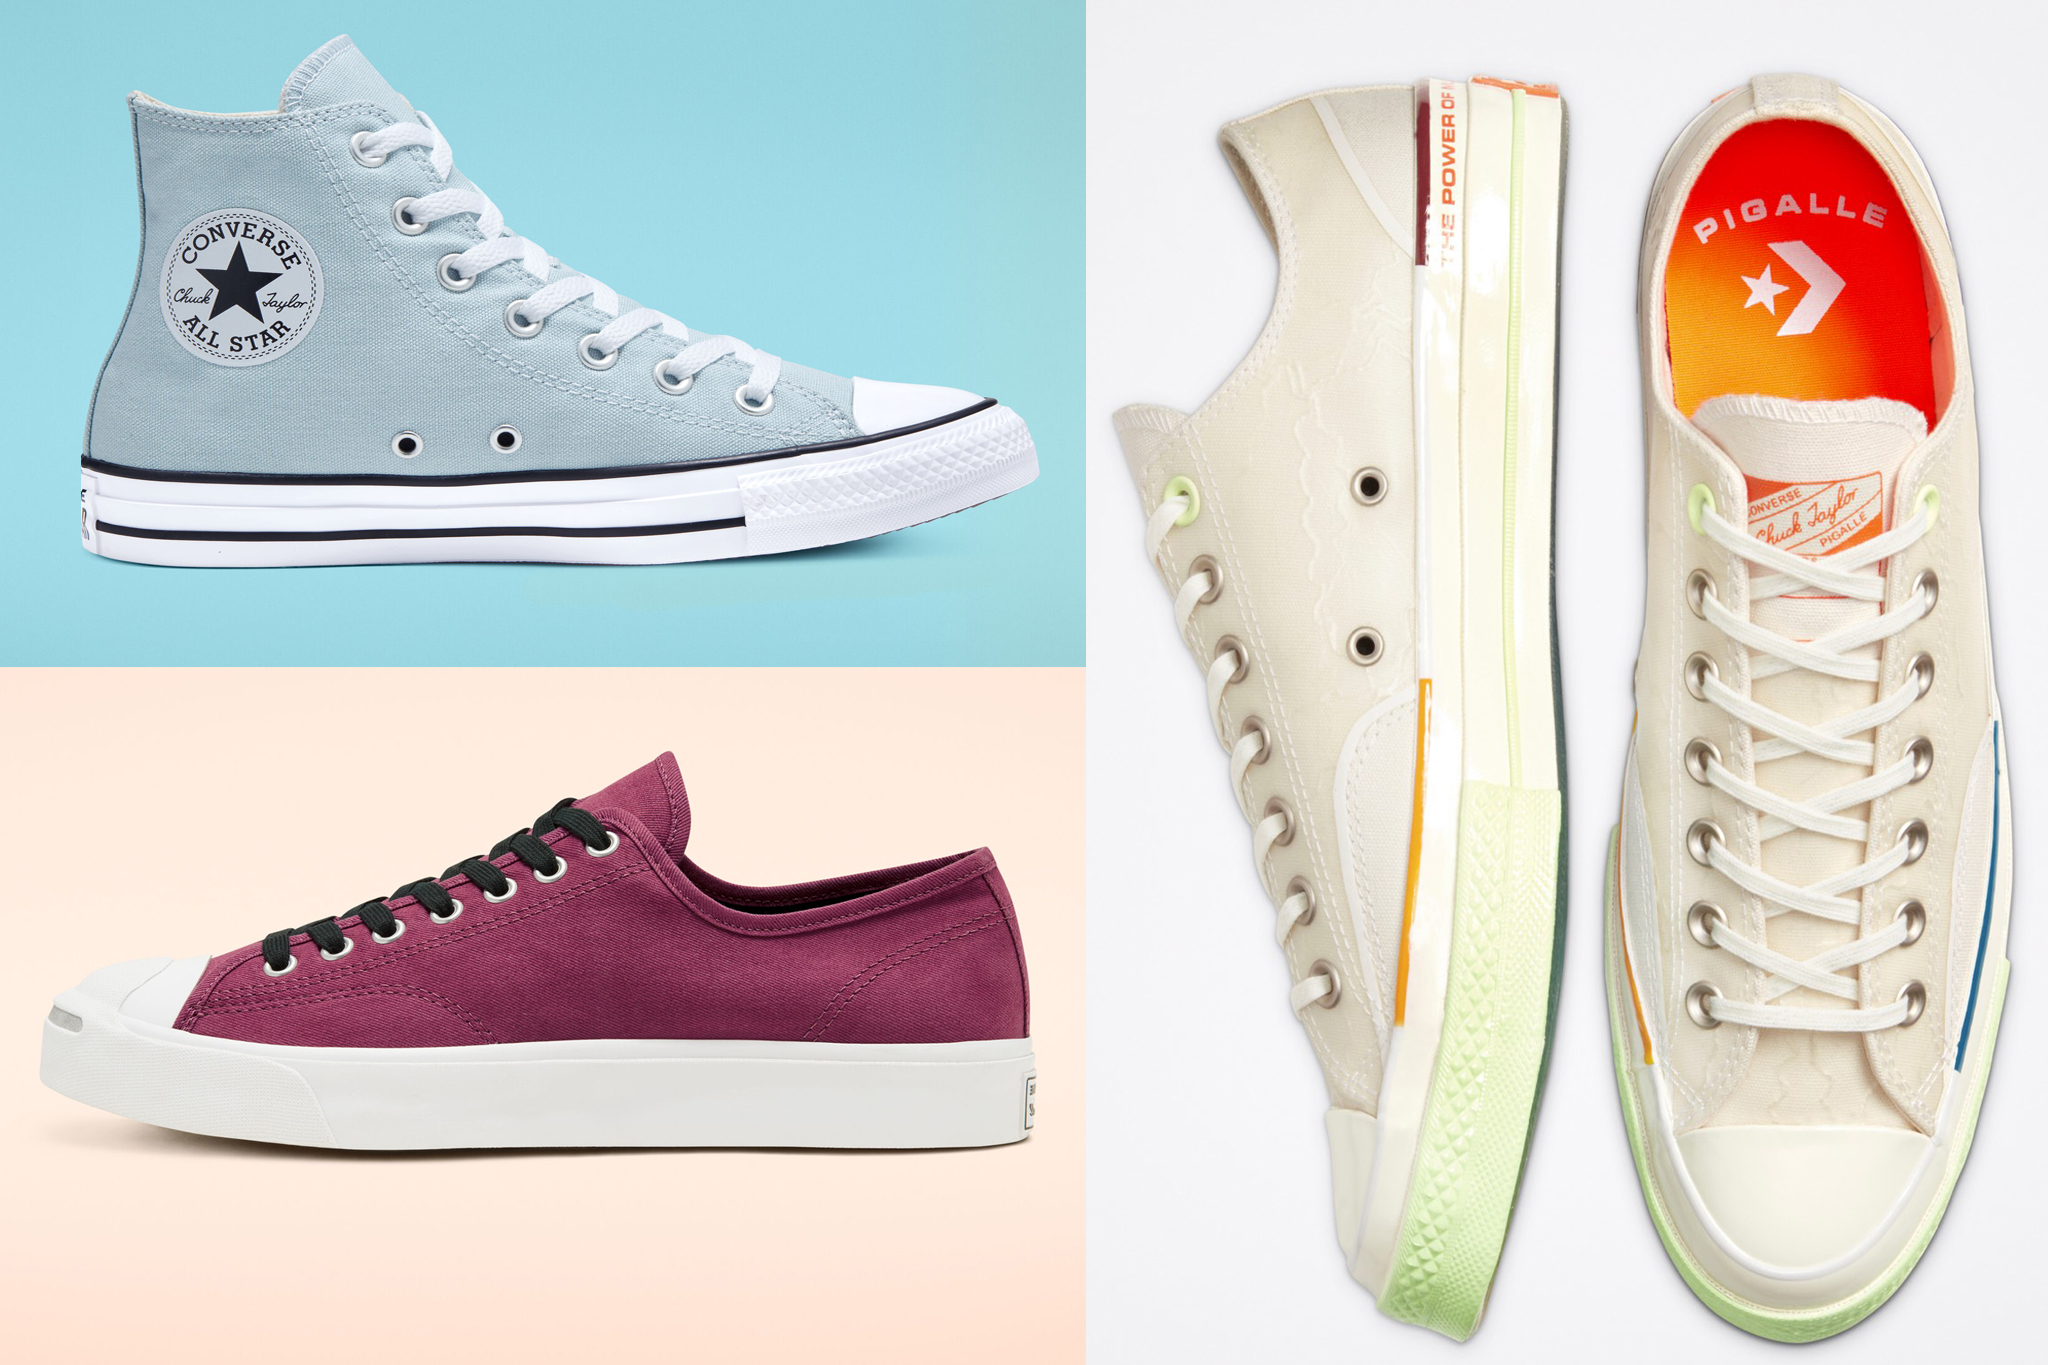 Chuck Taylor sneakers are 30% off at Converse.com